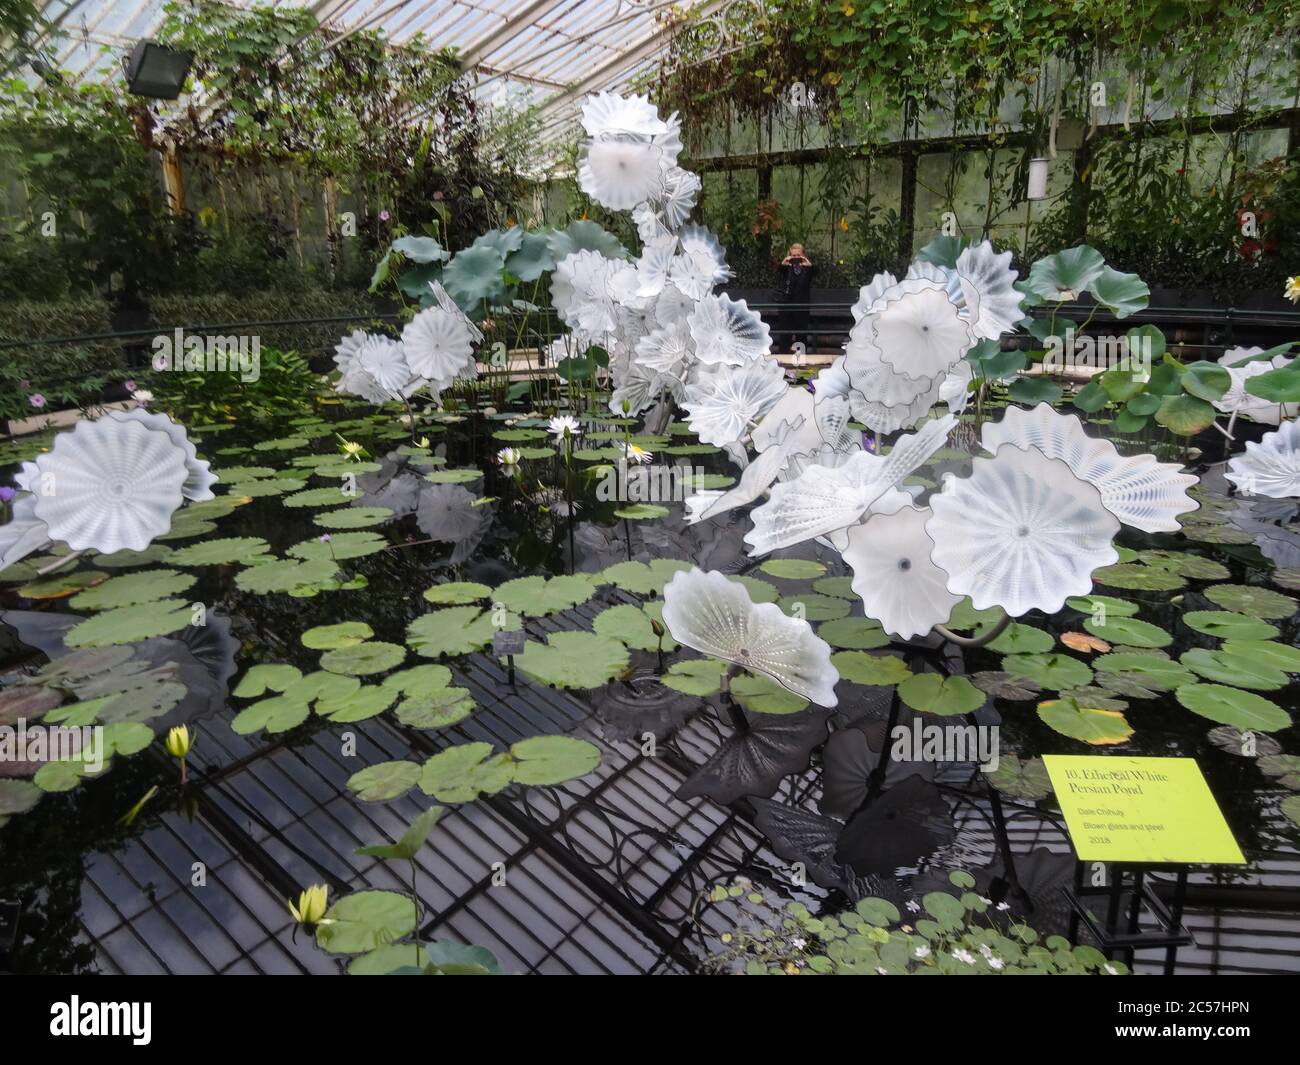 Dale Chihuly's Ethereal White Persian Pond sculpture in Kew Gardens, London, UK Stock Photo